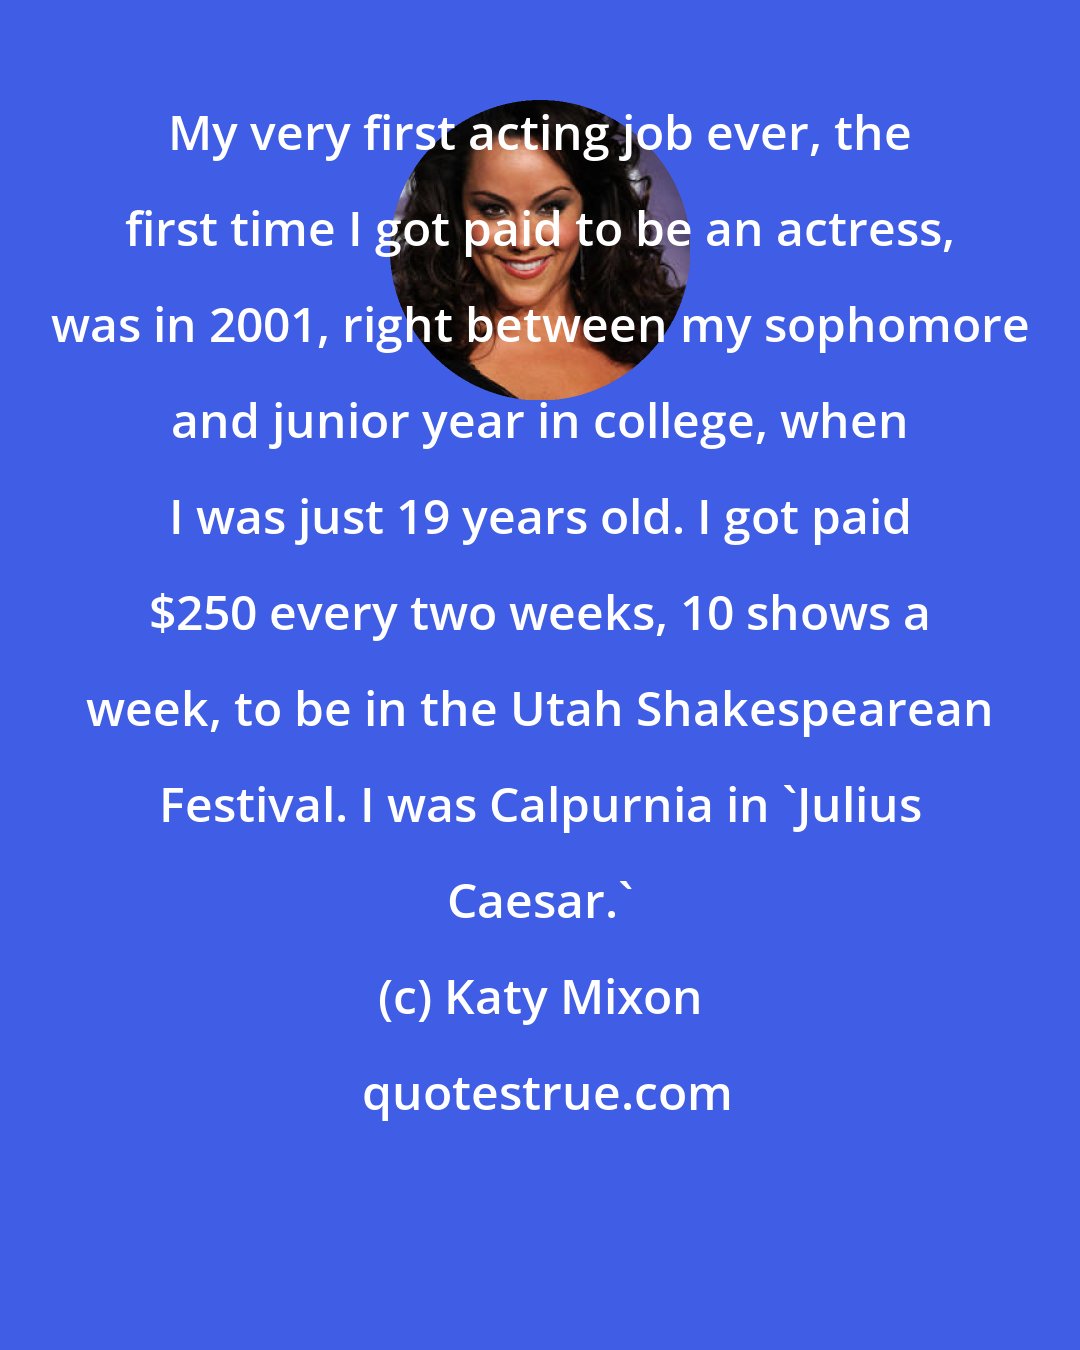 Katy Mixon: My very first acting job ever, the first time I got paid to be an actress, was in 2001, right between my sophomore and junior year in college, when I was just 19 years old. I got paid $250 every two weeks, 10 shows a week, to be in the Utah Shakespearean Festival. I was Calpurnia in 'Julius Caesar.'